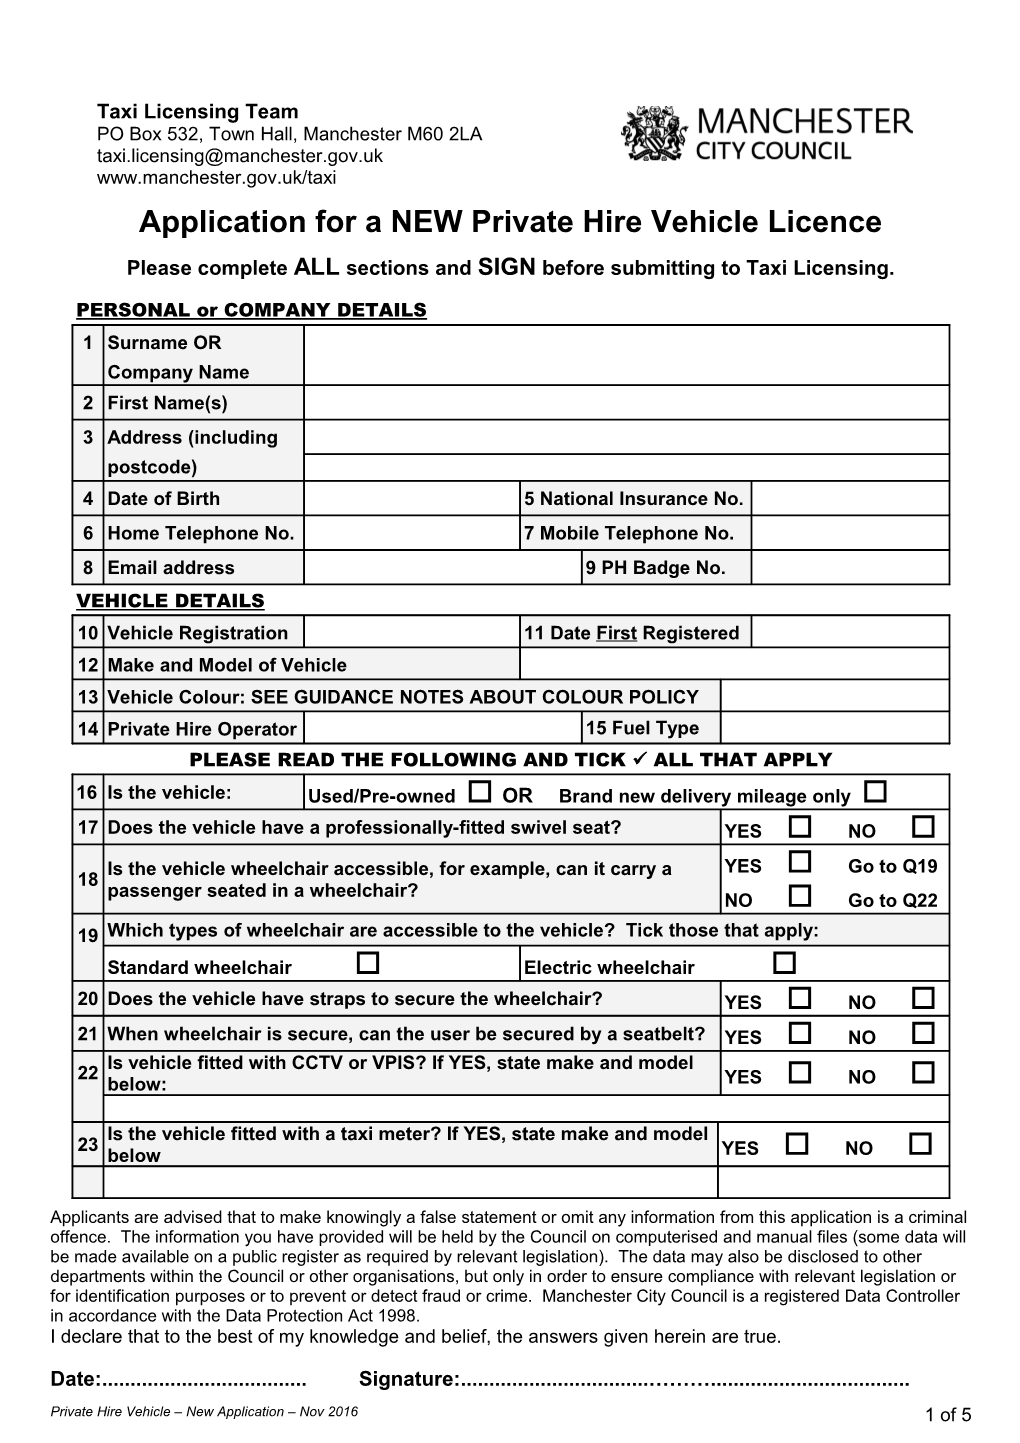 Application for a NEW Private Hire Vehicle Licence